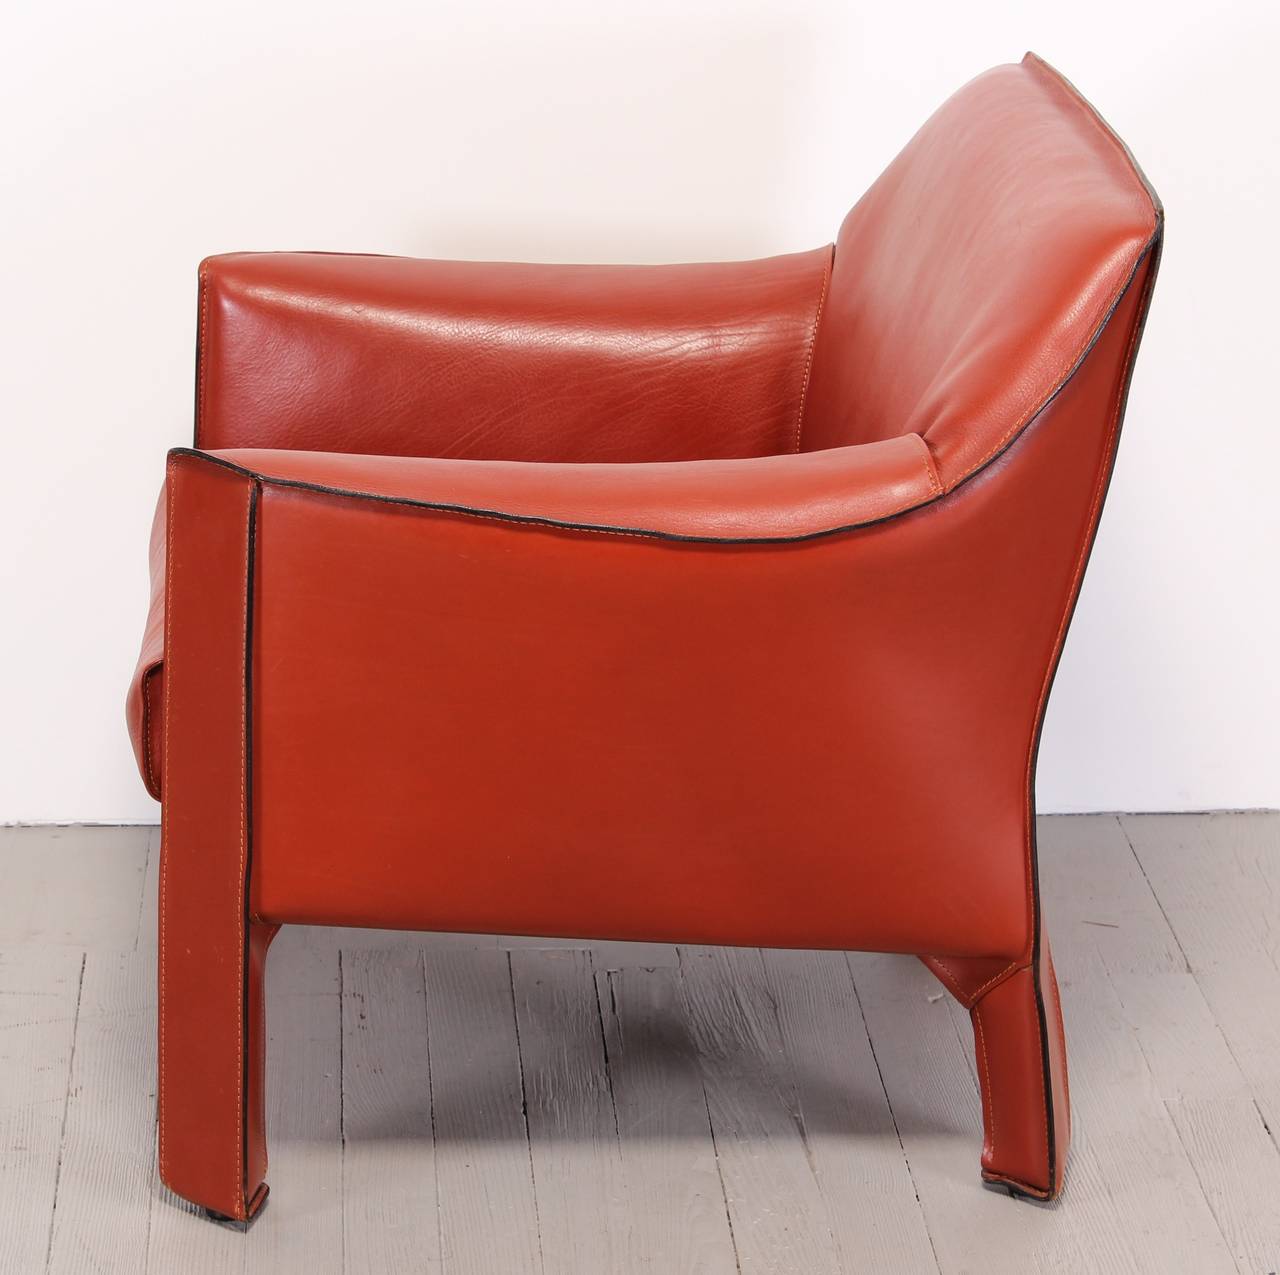 Other Large 415 Cab Chair by Mario Bellini for Cassina